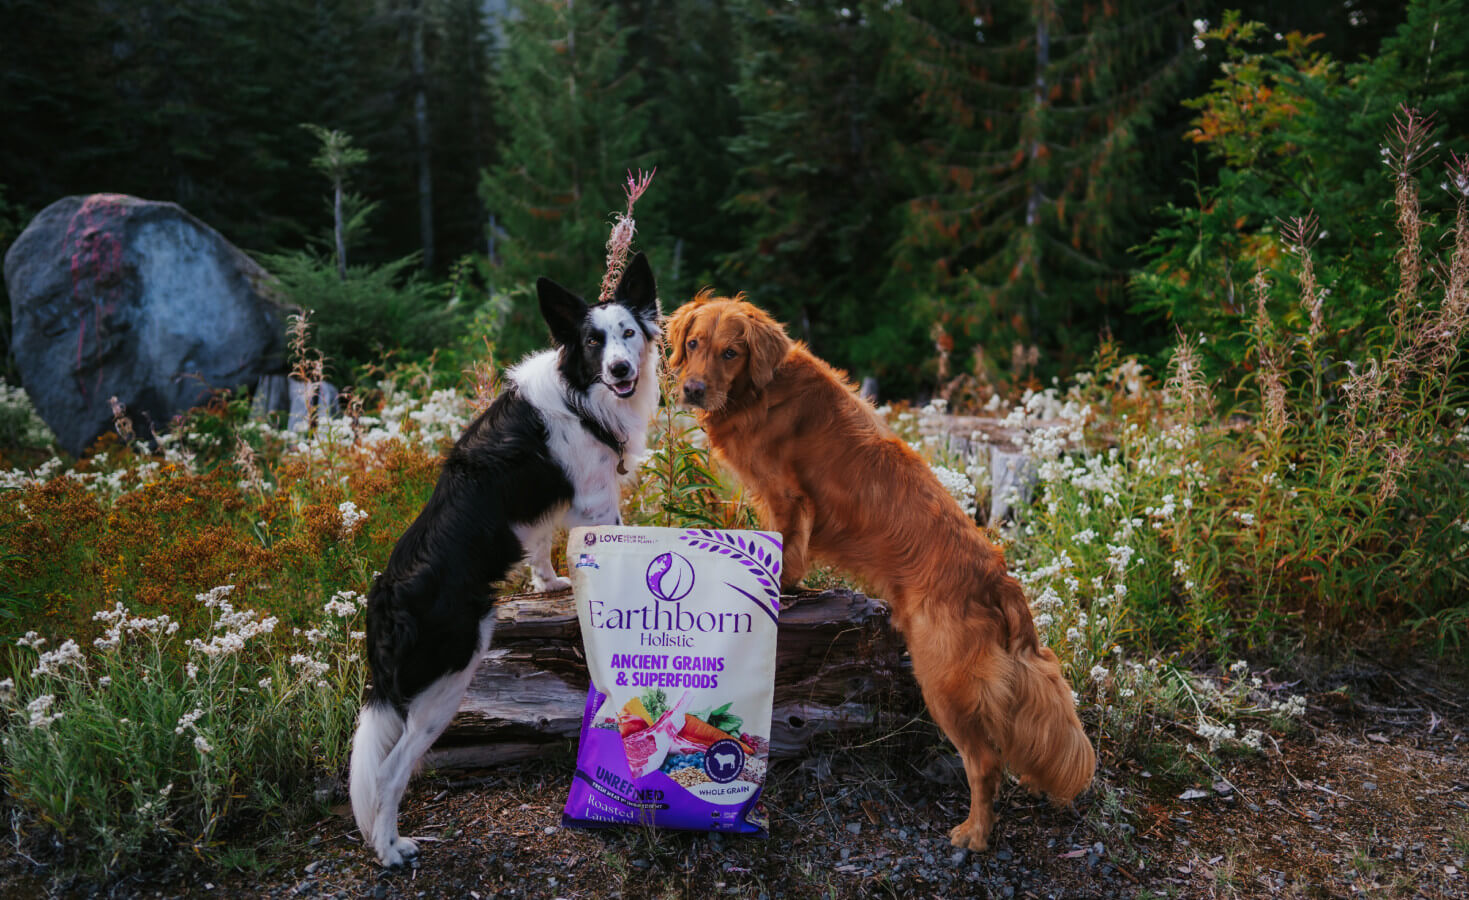 Dogs stand with front paws on stump behind a bag of Earthborn dog food